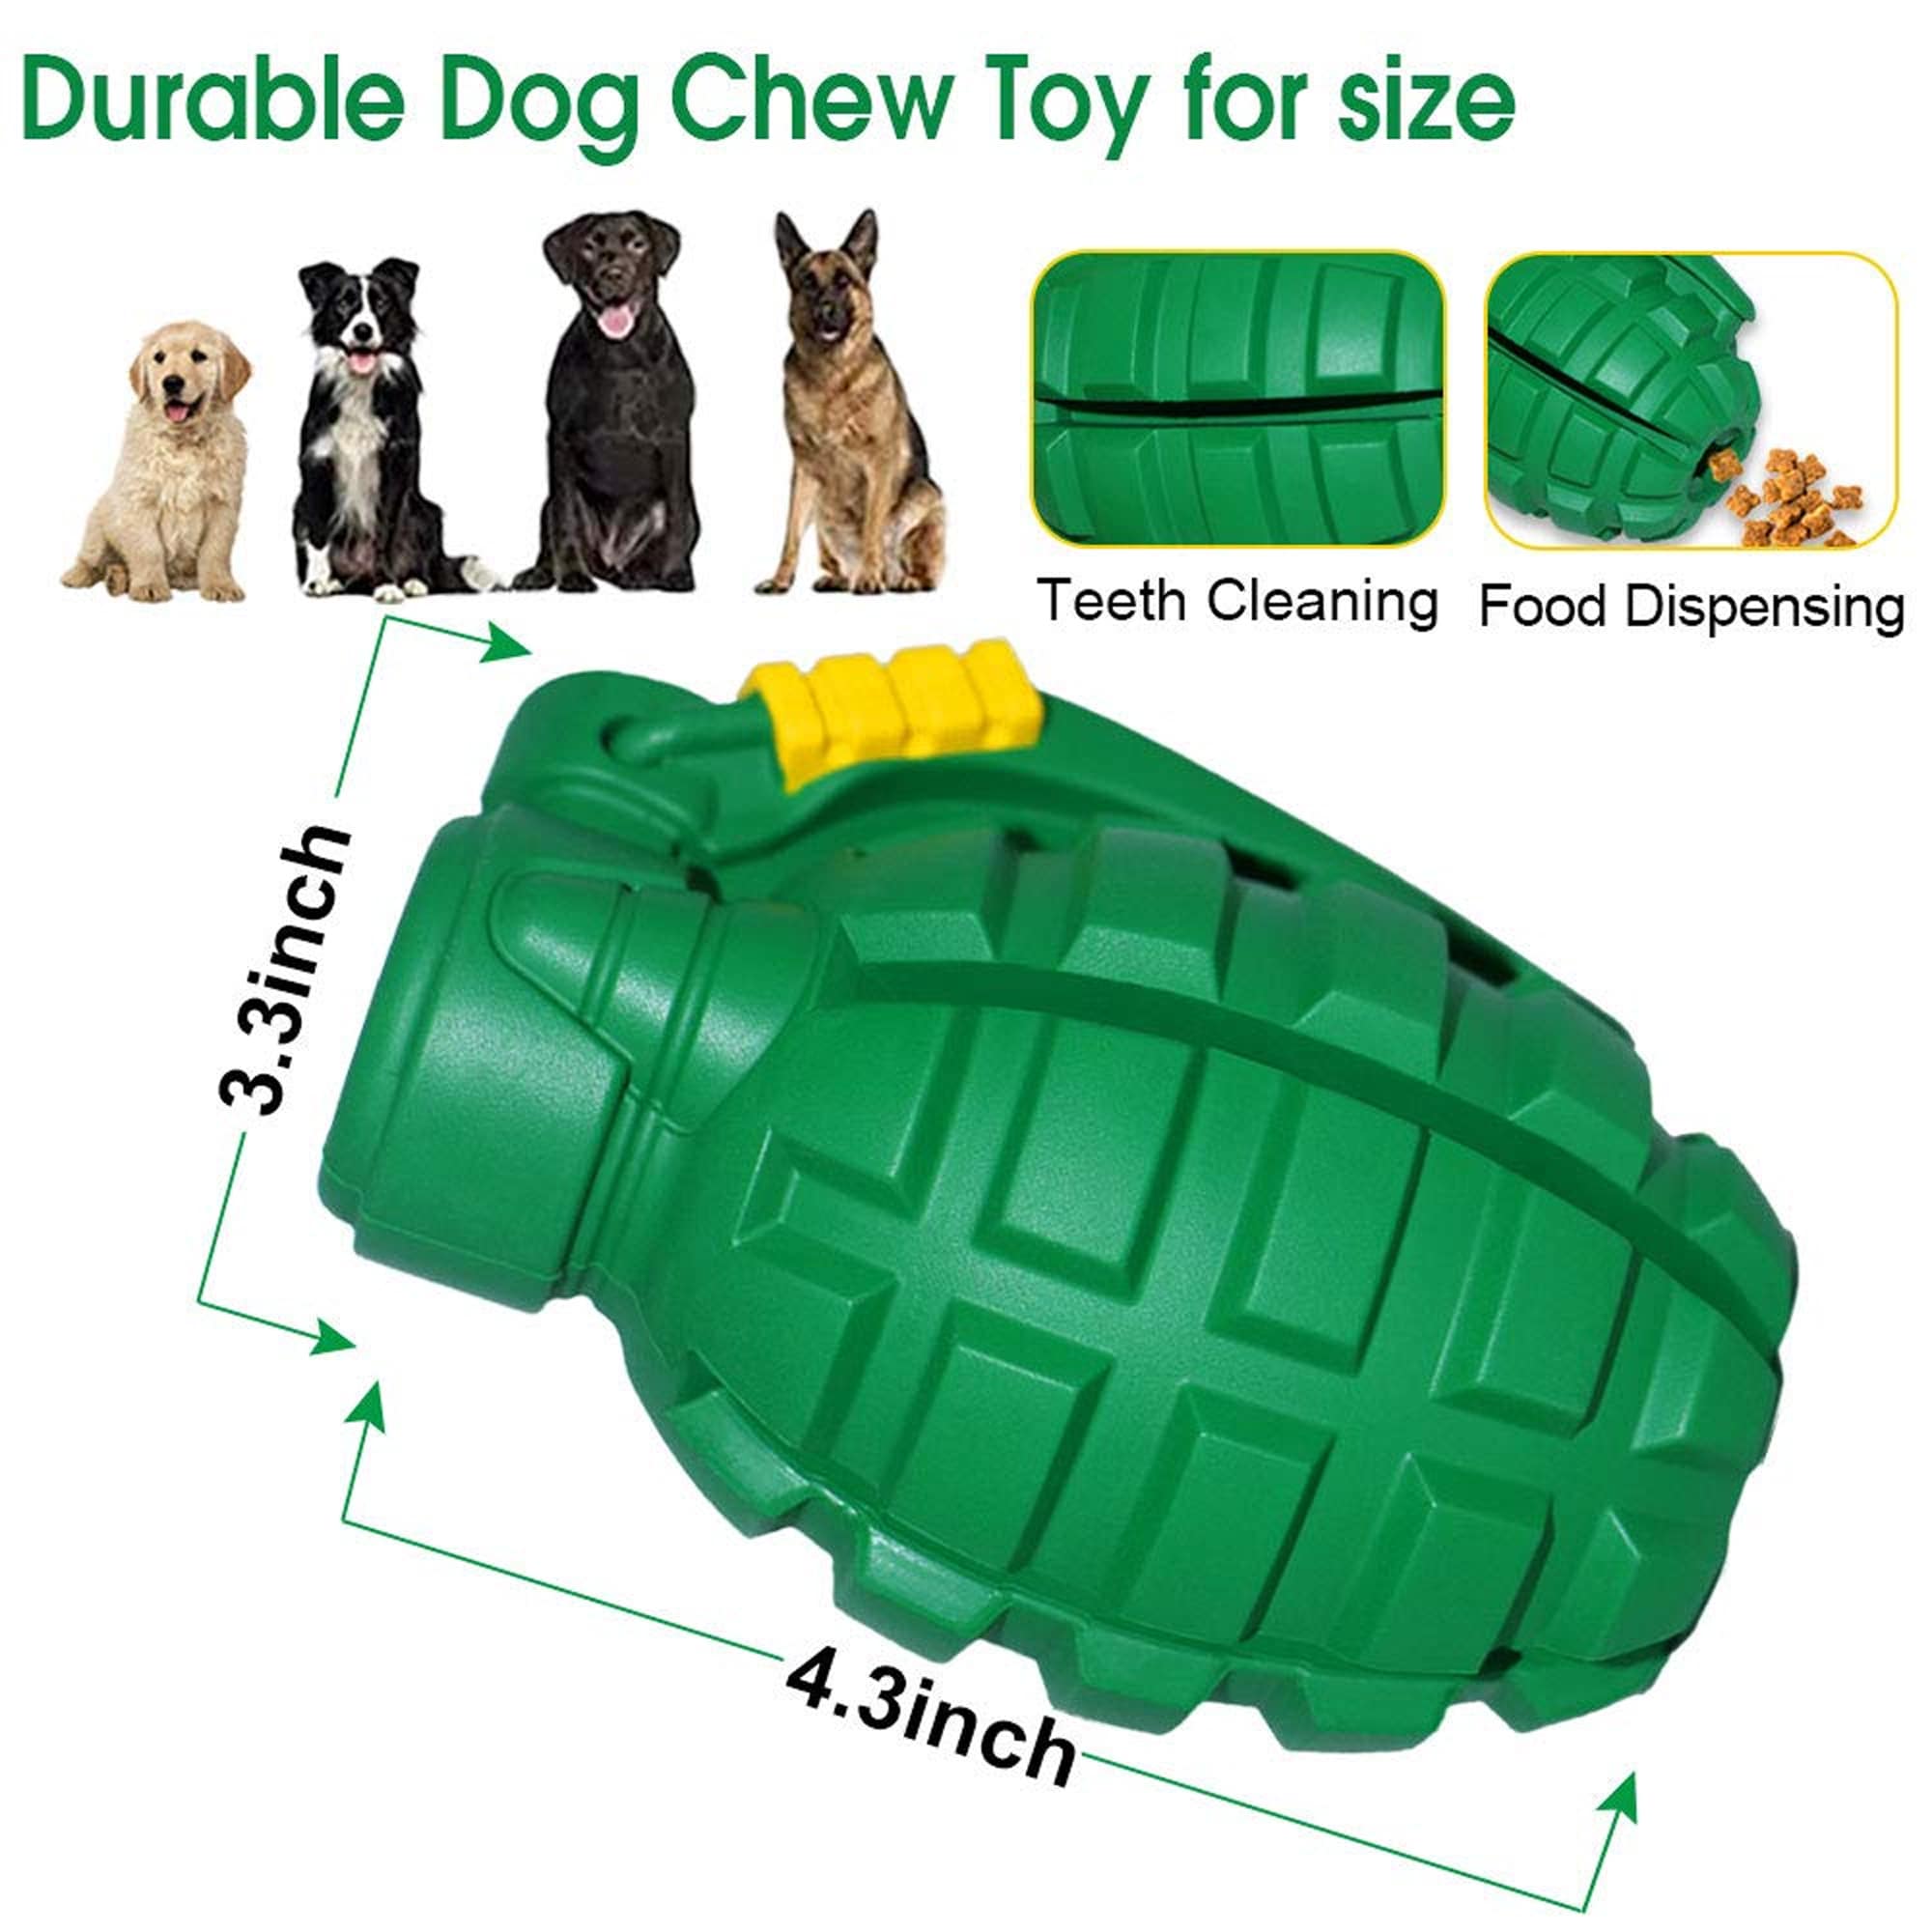 Food Grade Grenade Shape Dog Toys - Safe and Fun for Your Furry Friend